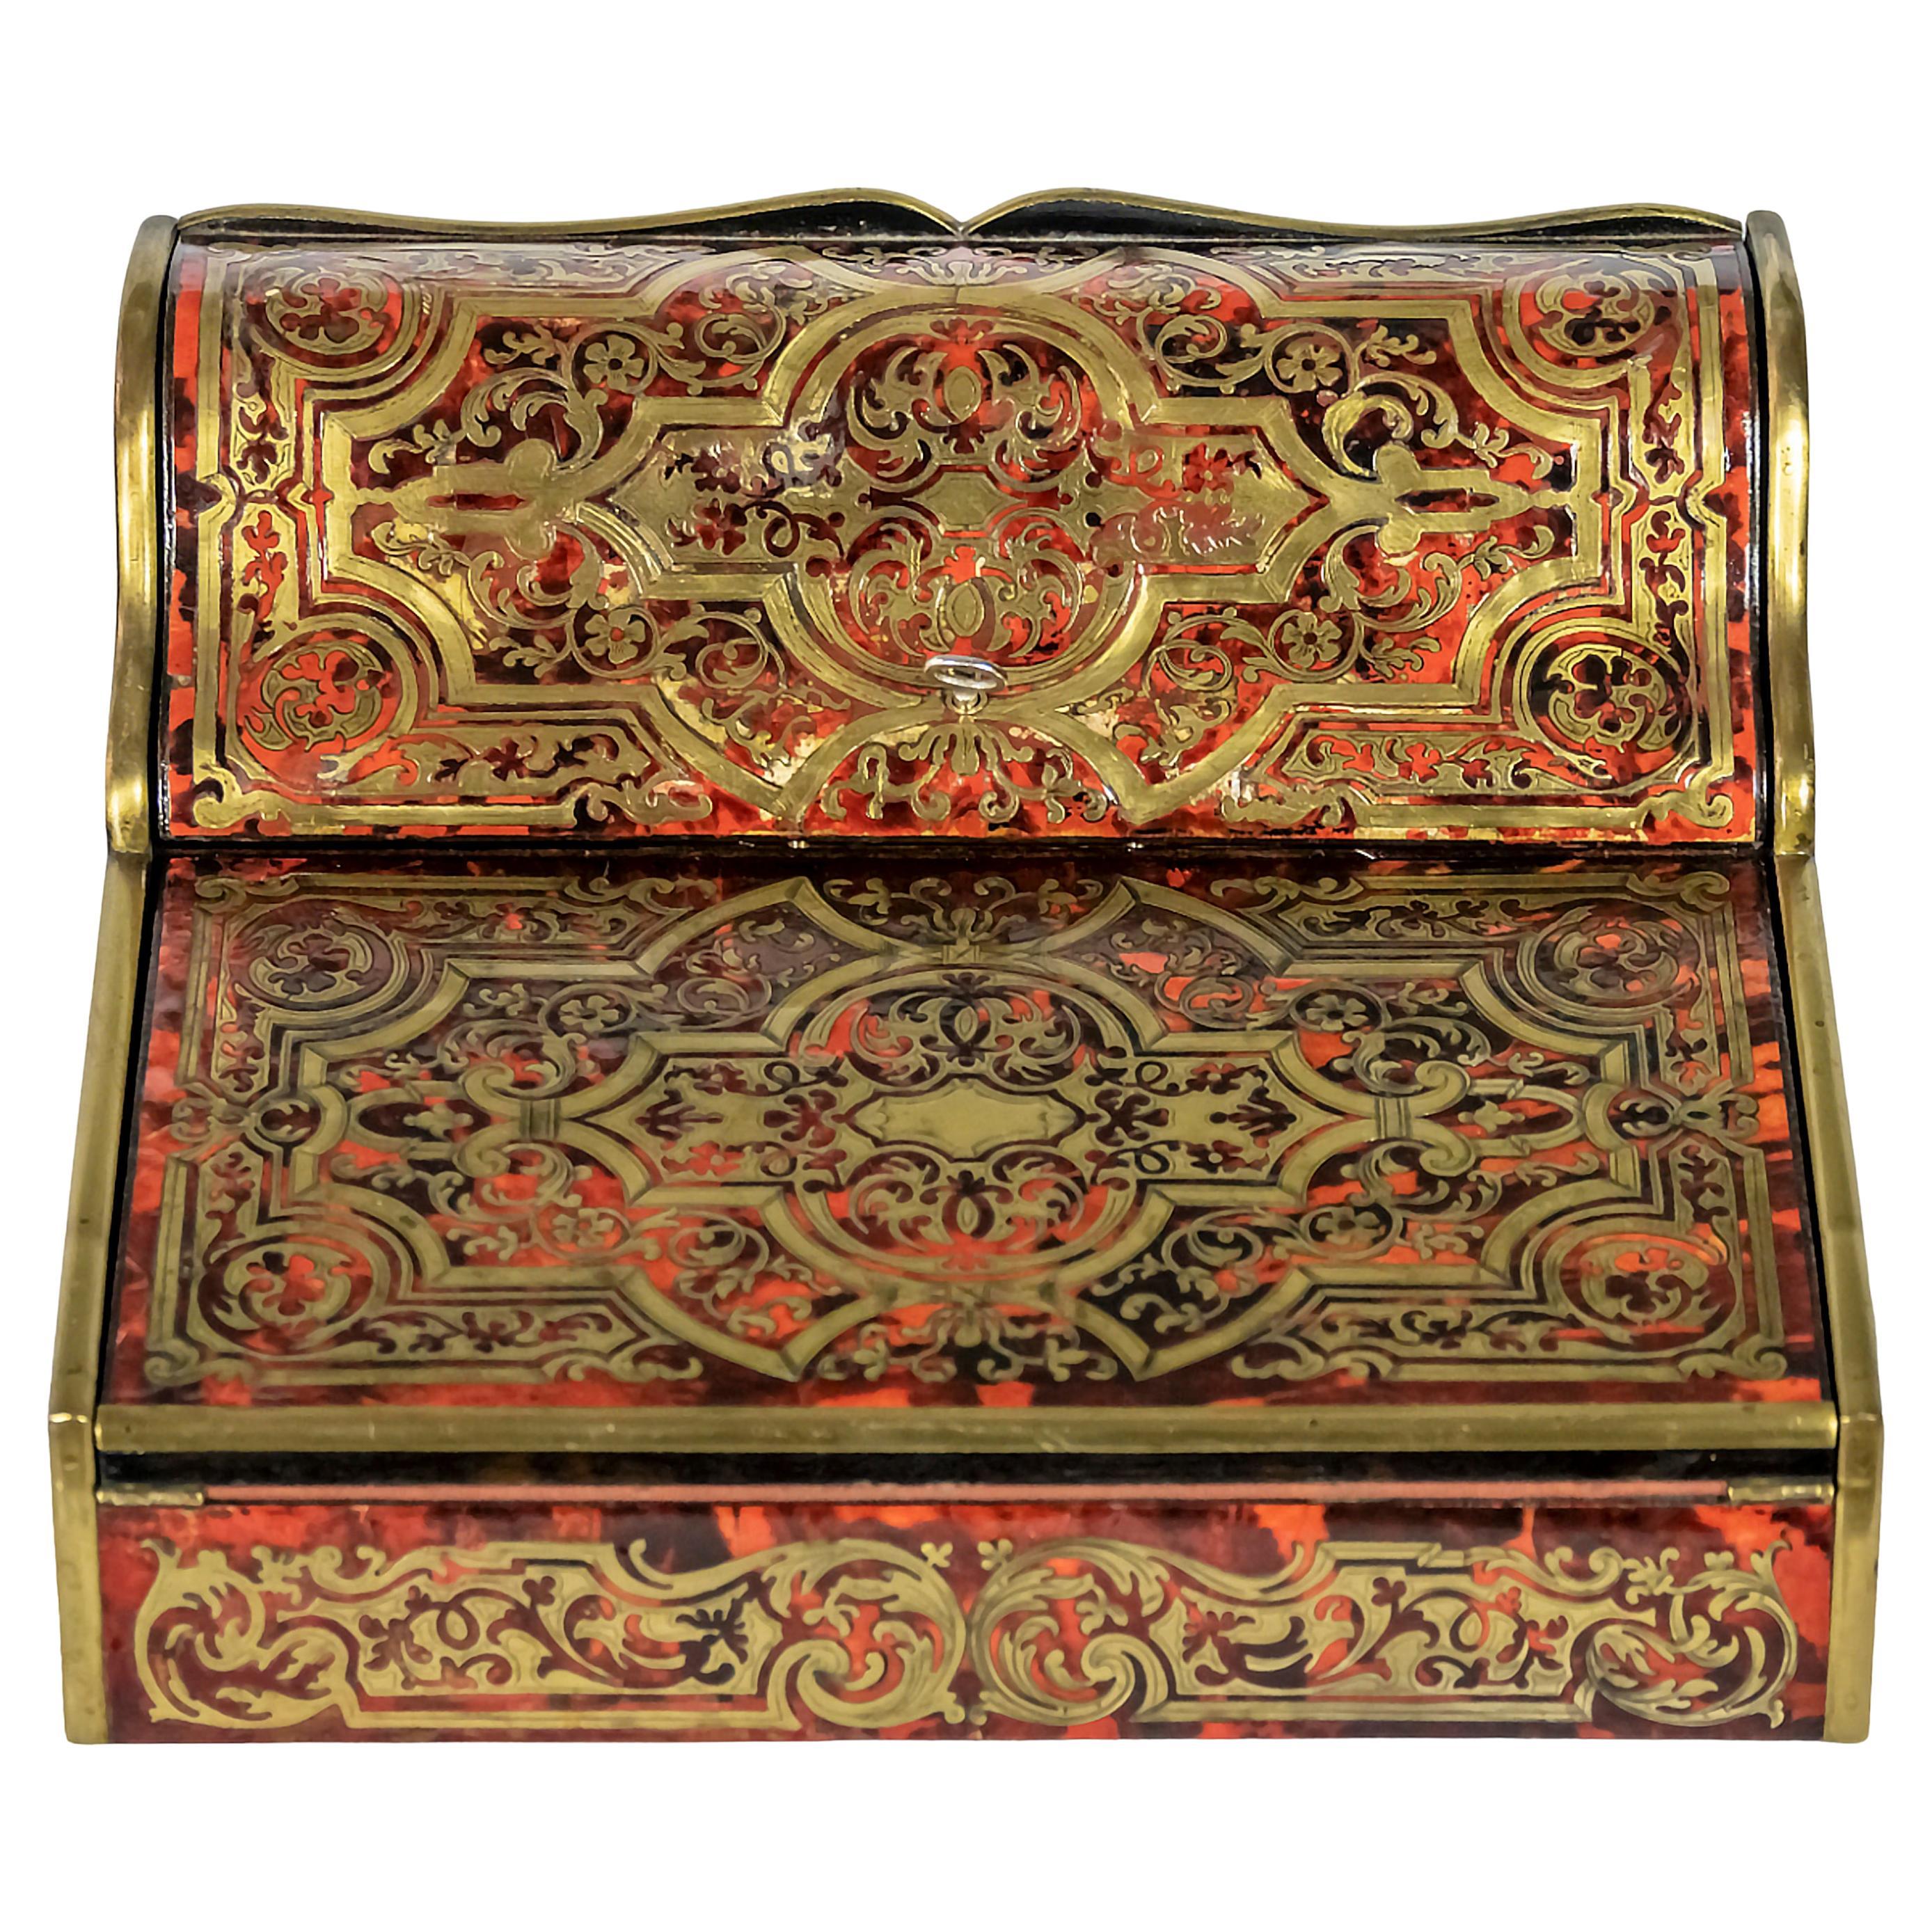 Antique 19th century French Boulle Napoleon III marquetry with inlaid brass writing desk/table box.
Inside there is mail compartment, velvet textile, one inkwell place.
Key with perfectly functional lock.
Very good antique condition.
 